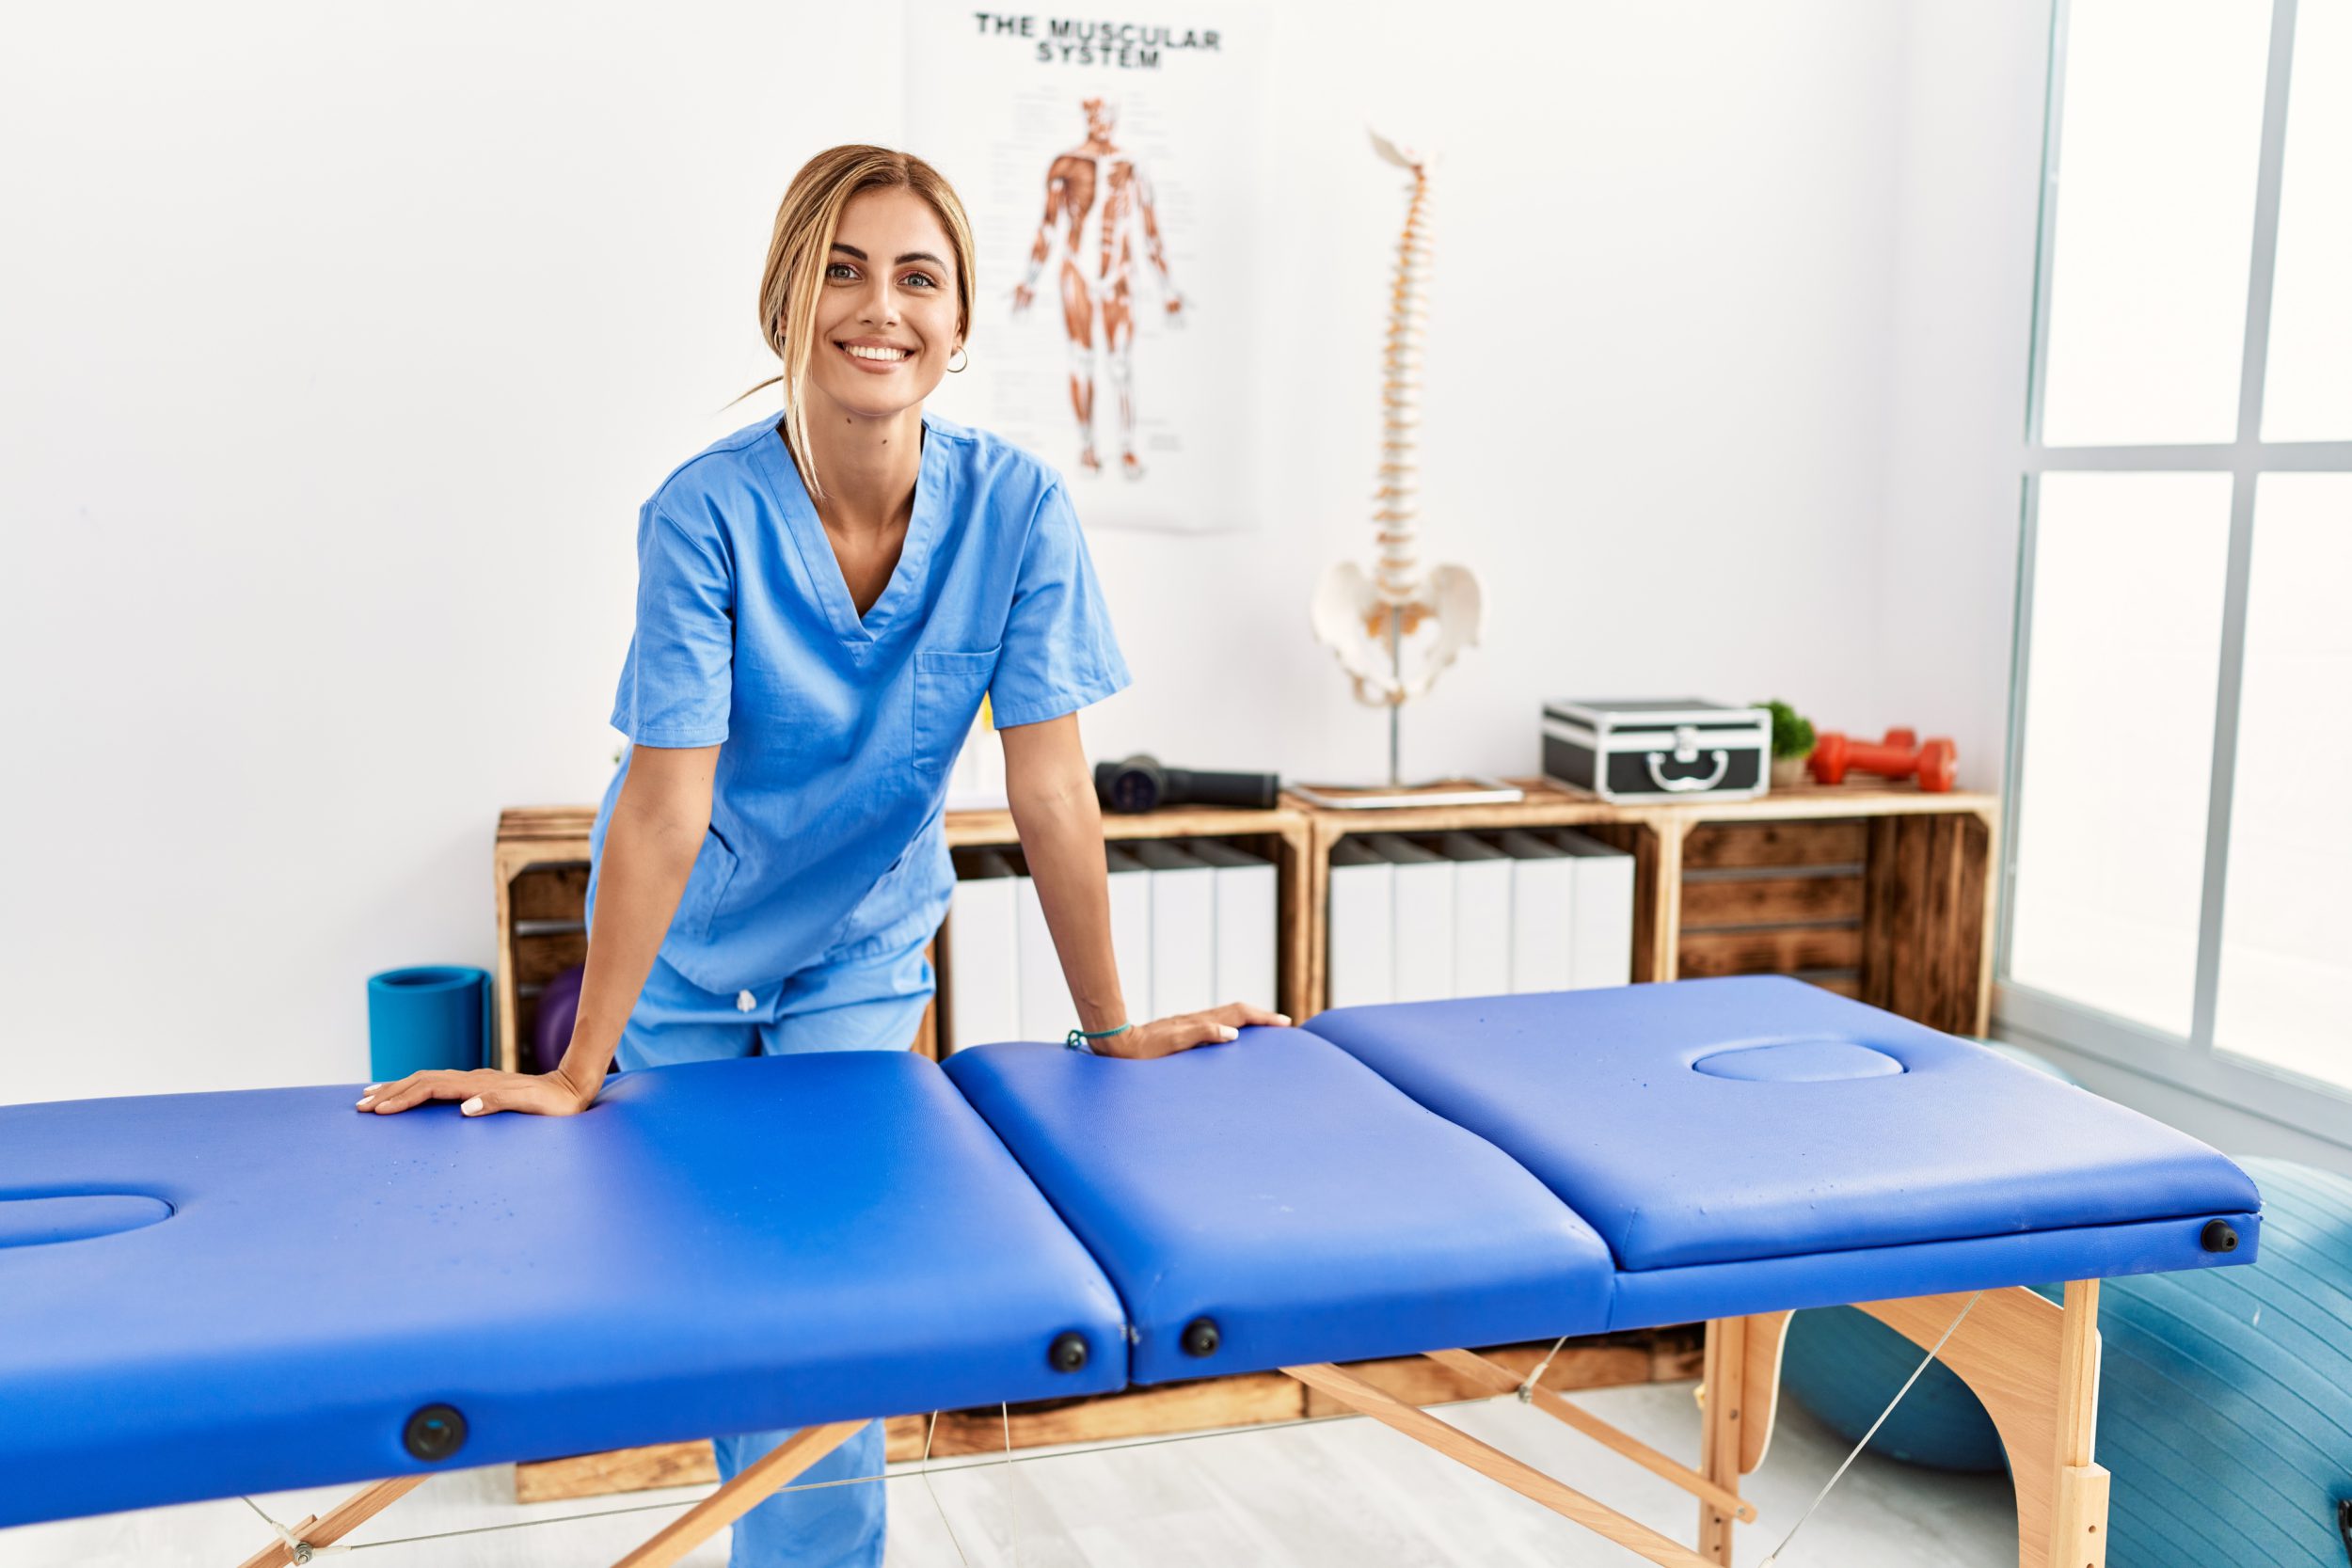 chiropractor leaning on table sourced from chiropractic equipment list